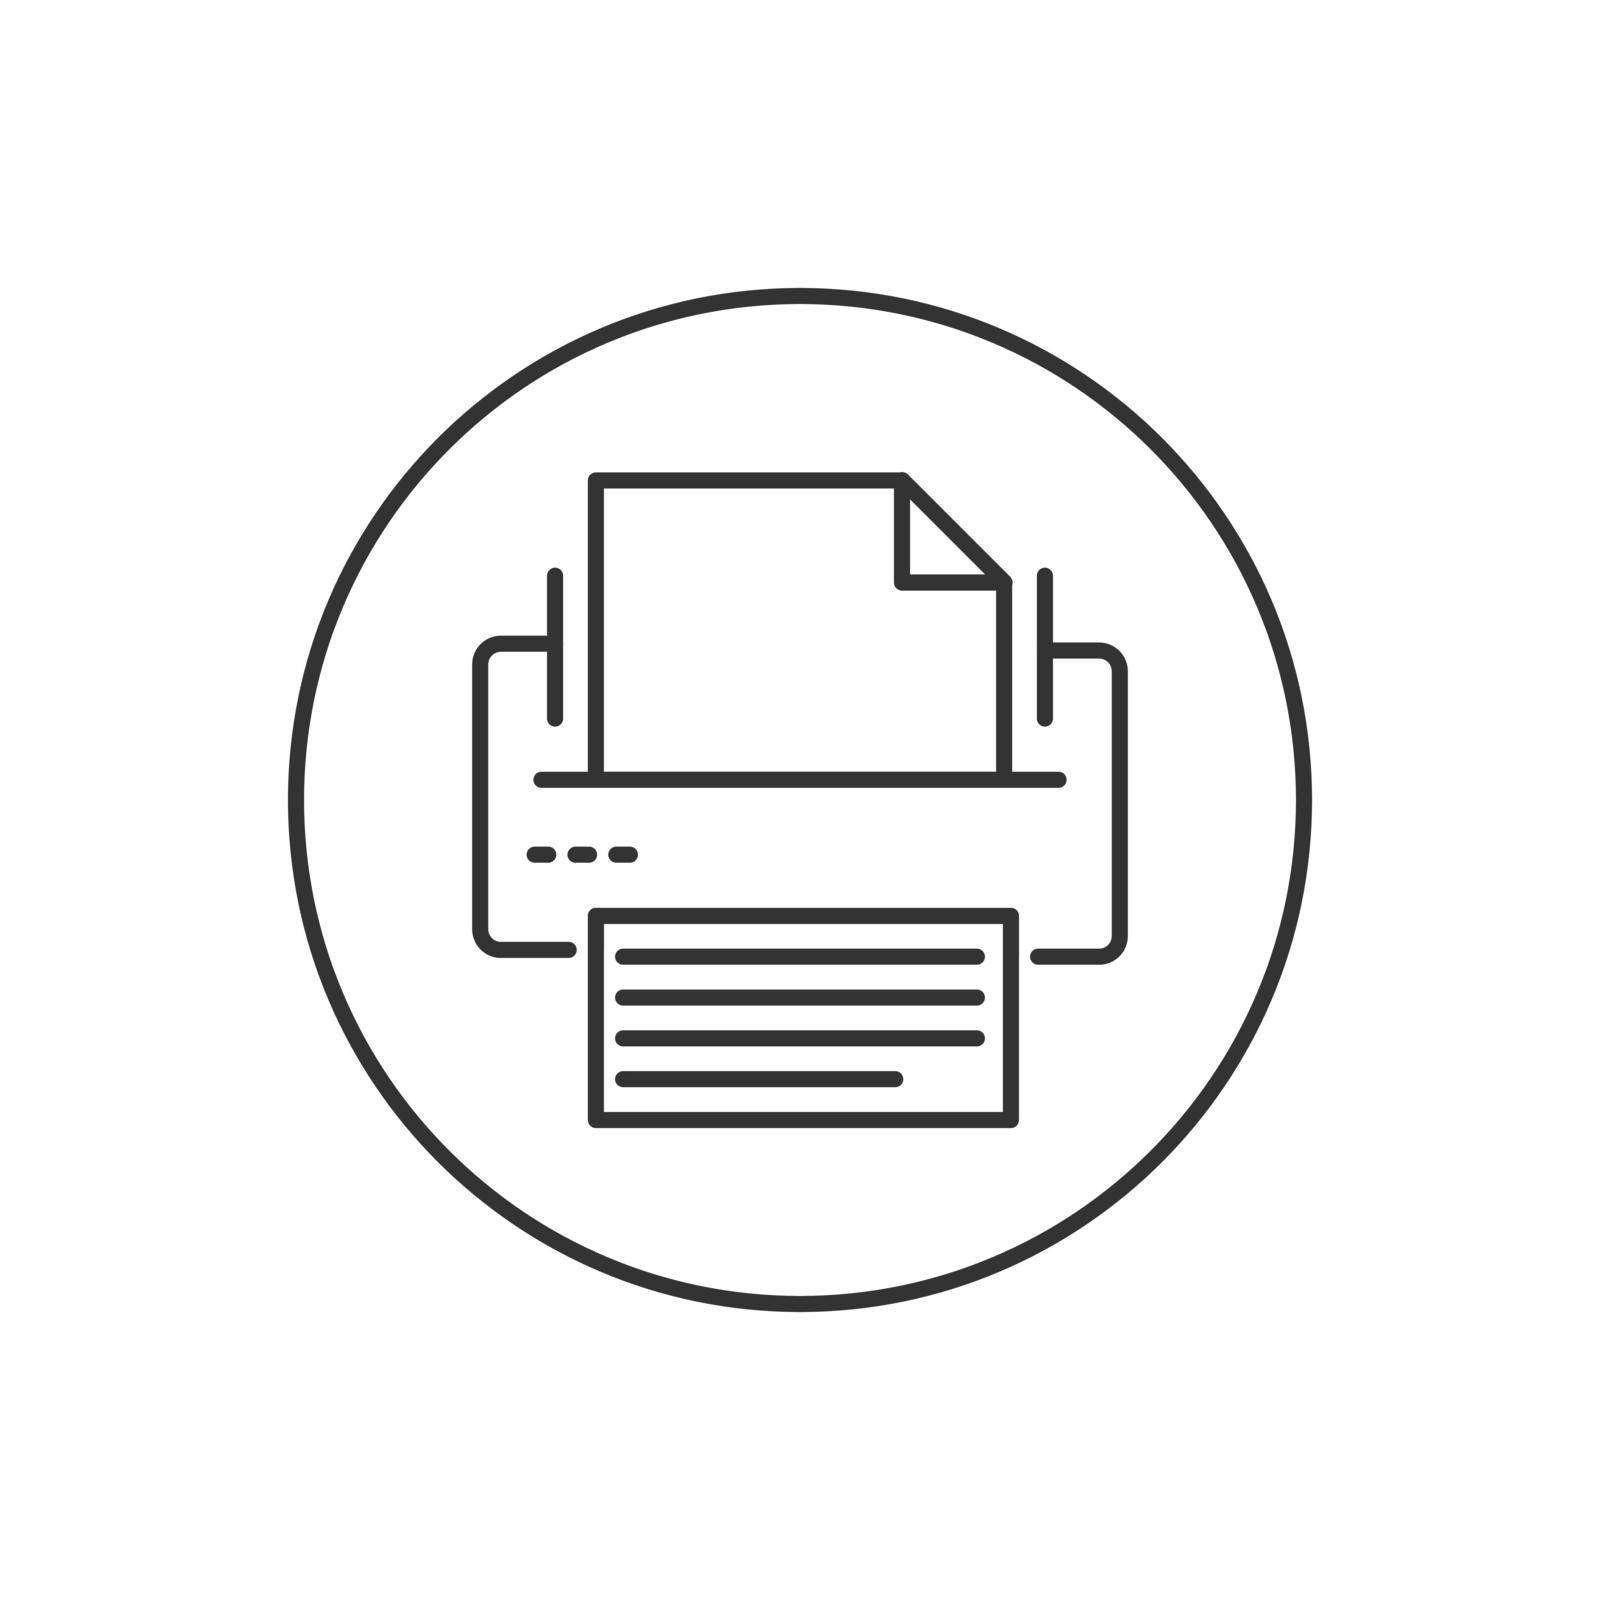 Printer or Fax Related Line Icon. by smoki